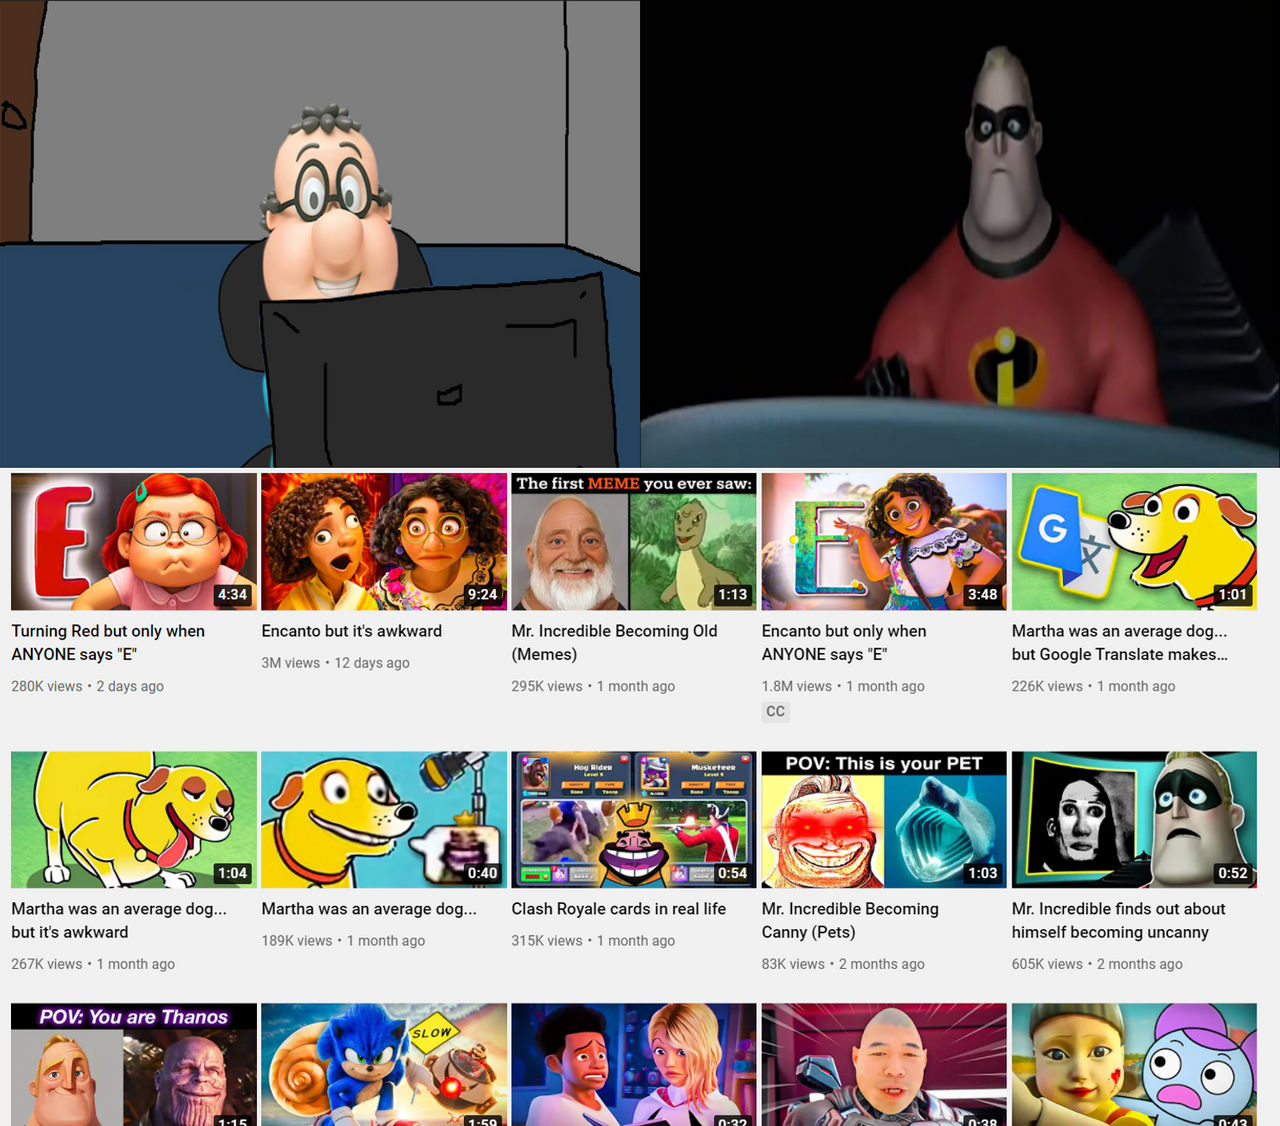 the first ever mr incredible becoming uncanny LL meme ever. POV: u